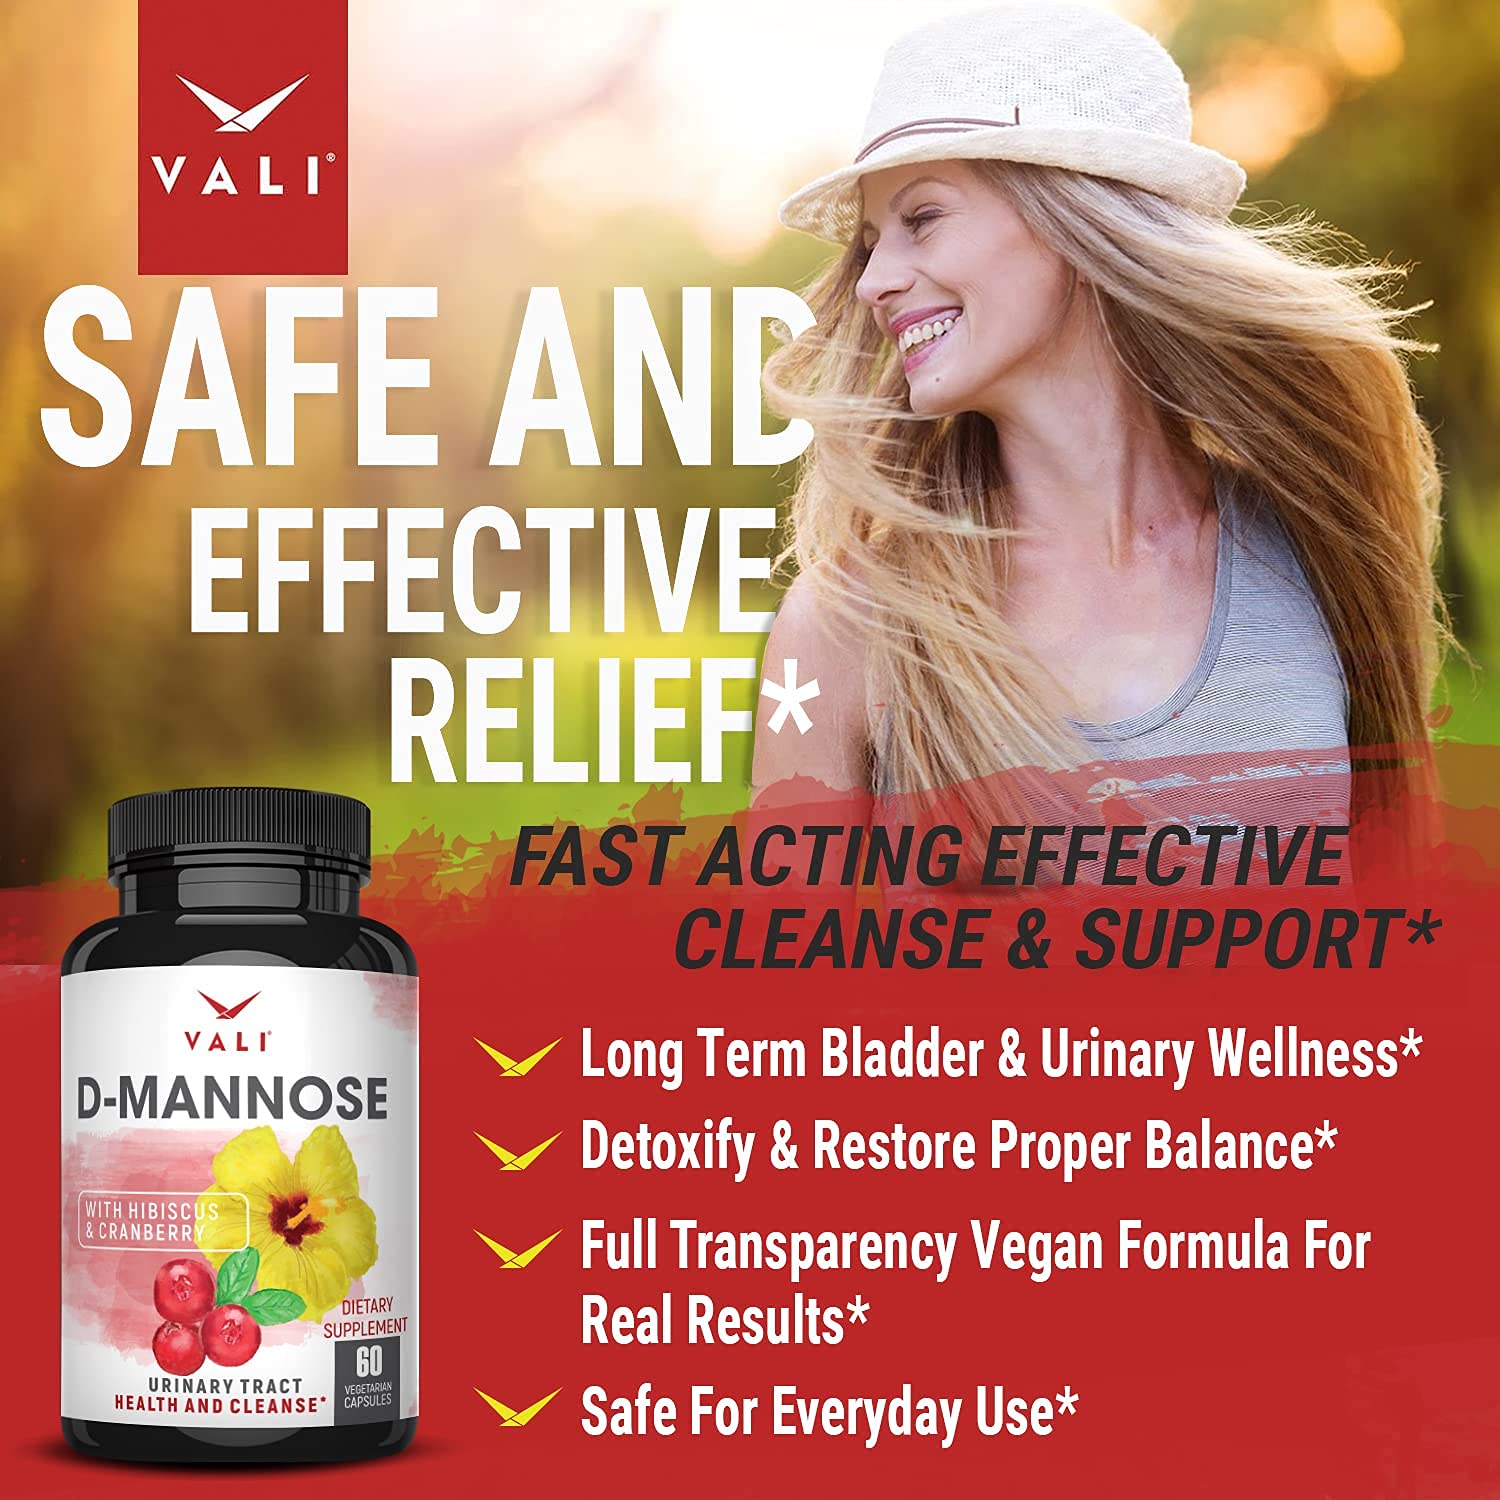 VALI D-Mannose & VALI Renew PMS Bundle - Urinary Tract Health and Cleanse with D-Mannose, Cranberry & Hibiscus and PMS Relief Supplement for Women’s Menstrual Cycle Vitamins & Herbal Support